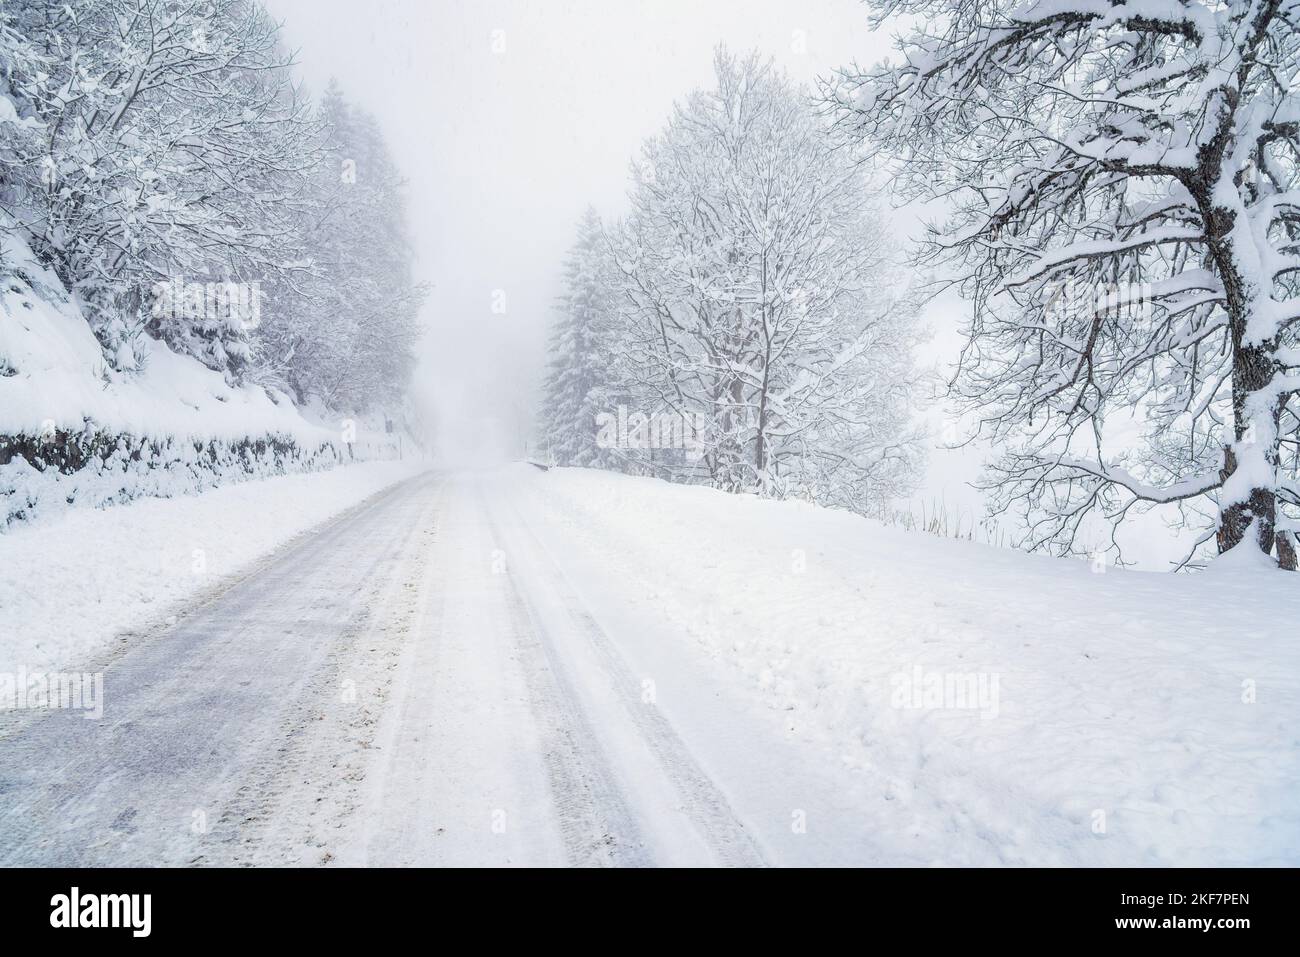 Poor visibility along a snow covered mountain road during a blizzard. Treacherous driving conditions. Stock Photo